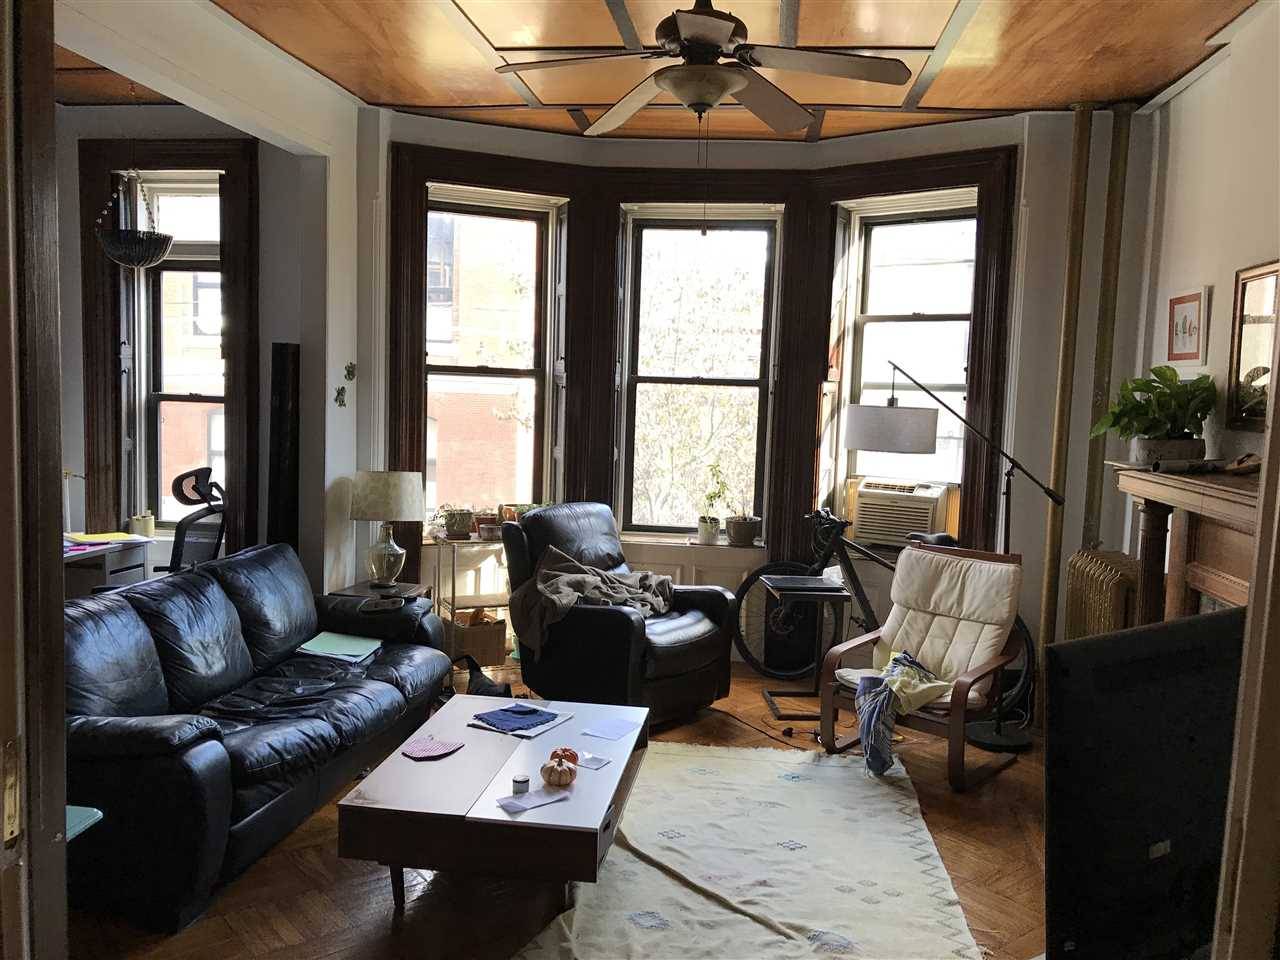 5th & Hudson Street large 1 Bedroom apartment in historic brownstone